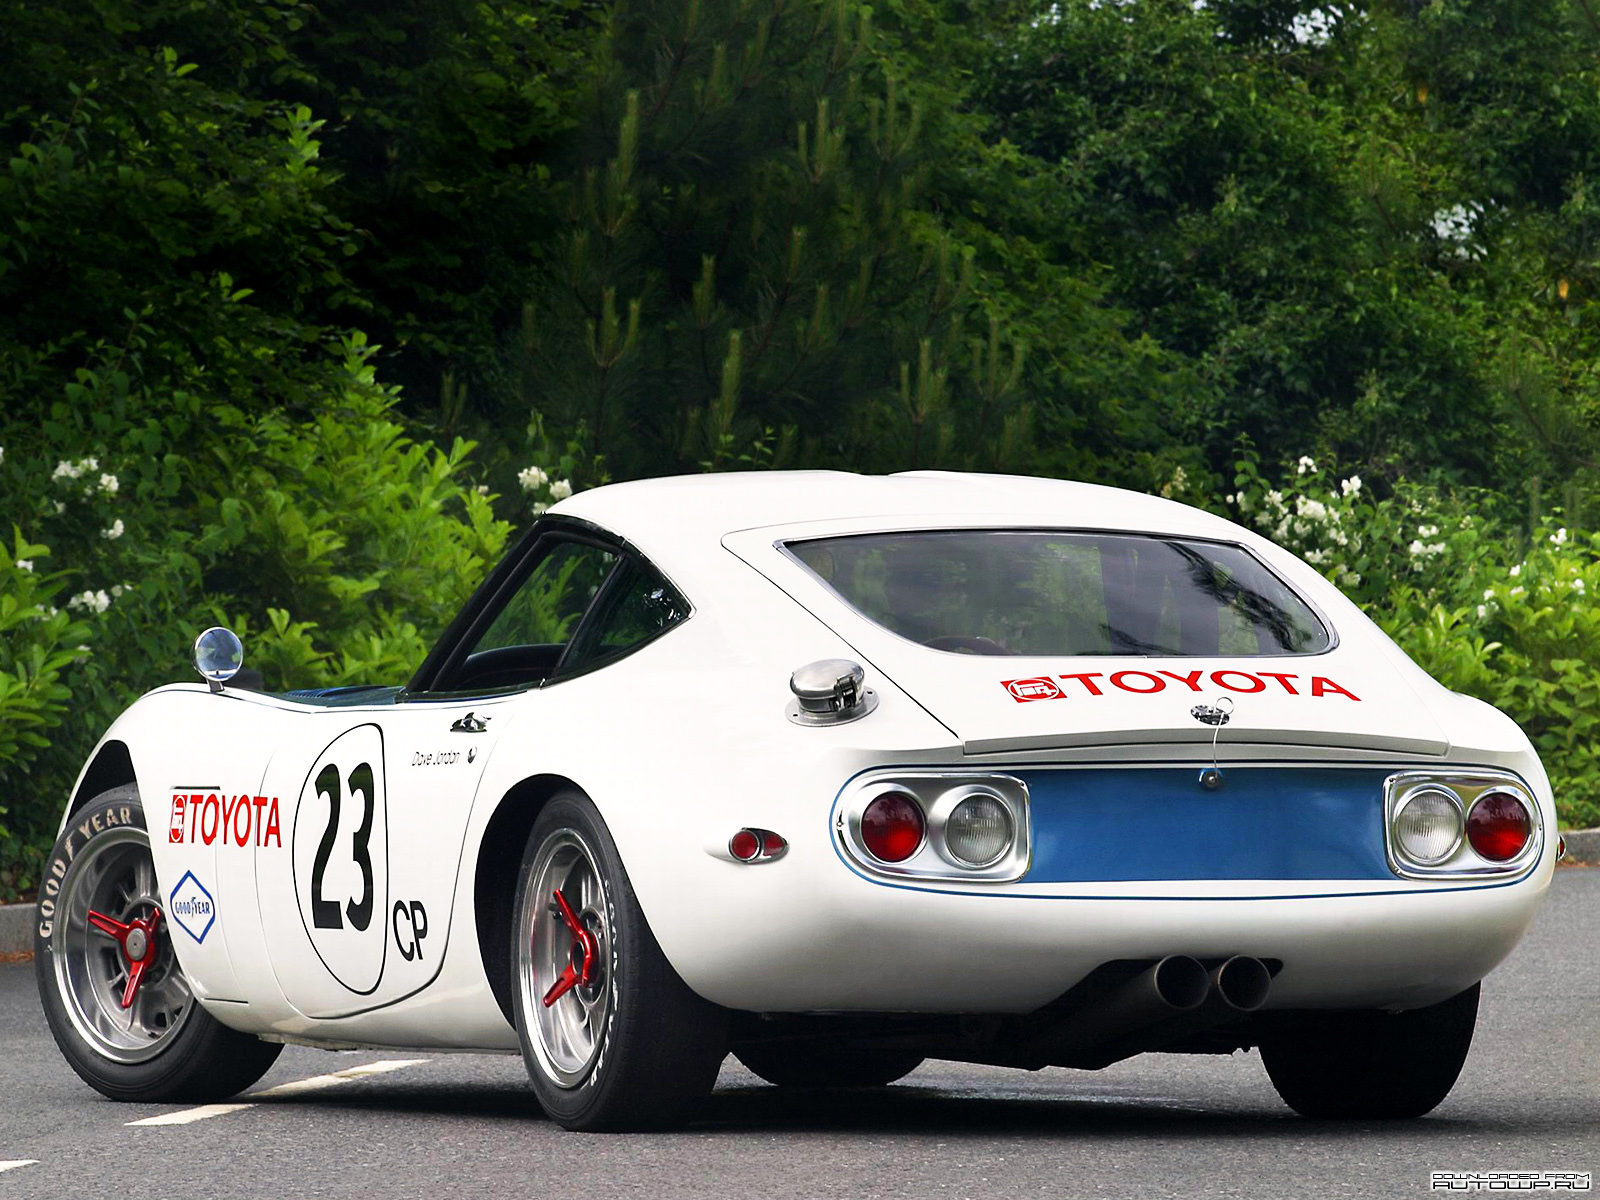 1968, Toyota, 2000gt, Shelby, Classic, Race, Racing, Muscle Wallpaper